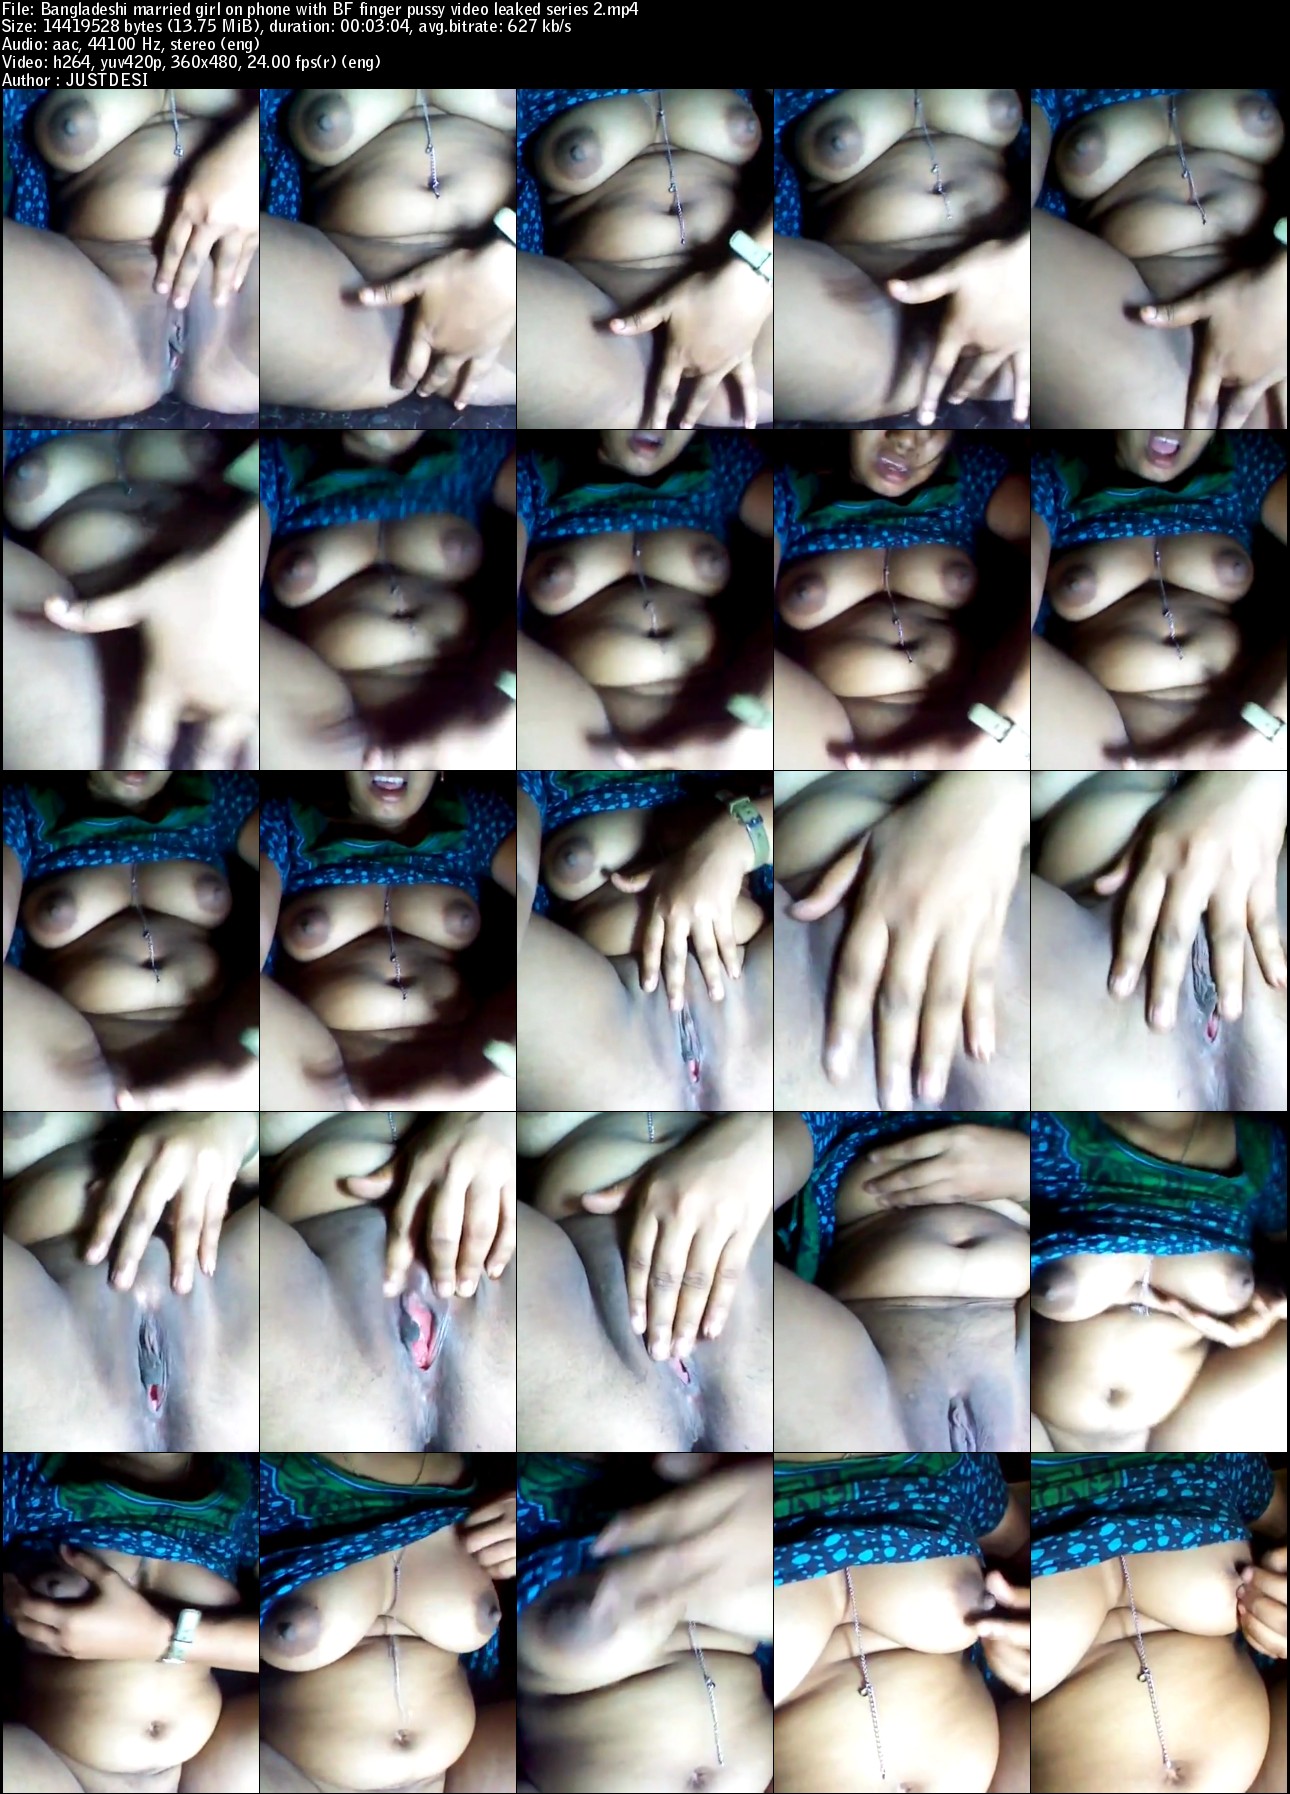 Bangladeshi%20married%20girl%20on%20phone%20with%20BF%20finger%20pussy%20video%20leaked%20series%202_www.JUSTDESI.ws.jpg